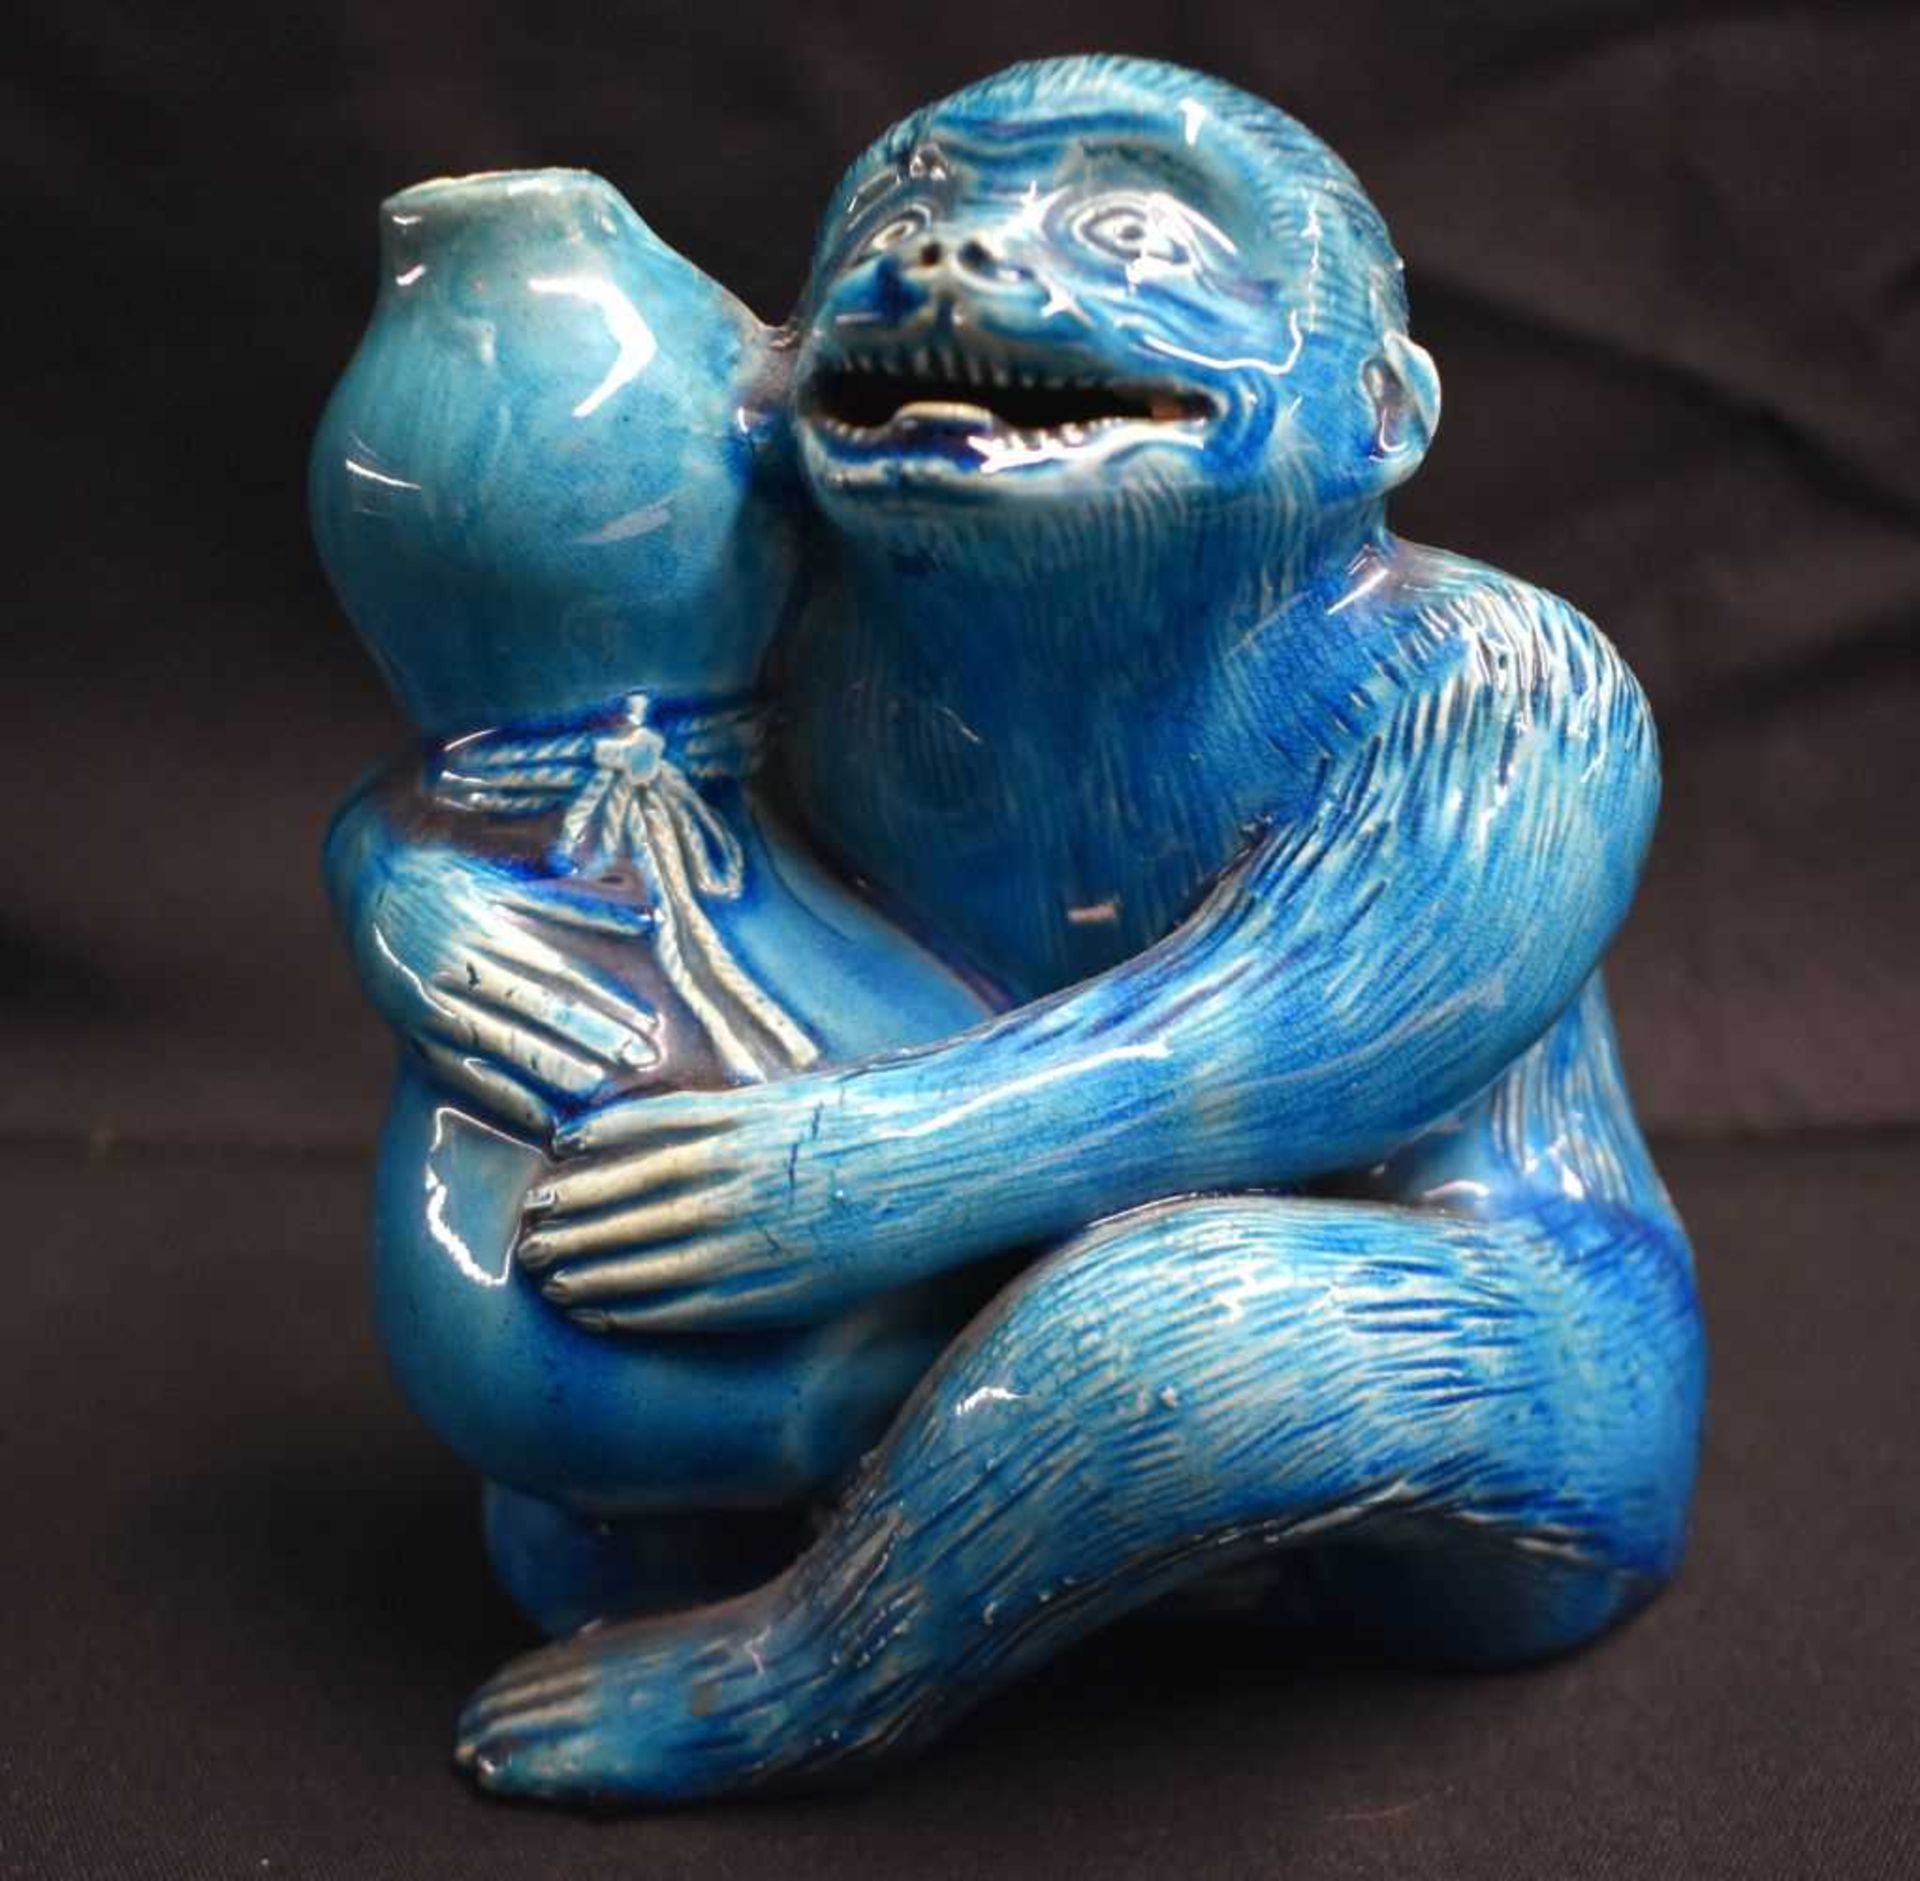 AN UNUSUAL 19TH CENTURY CHINESE BLUE GLAZED PORCELAIN MONKEY GOURD VASE or possibly Burmantofts.